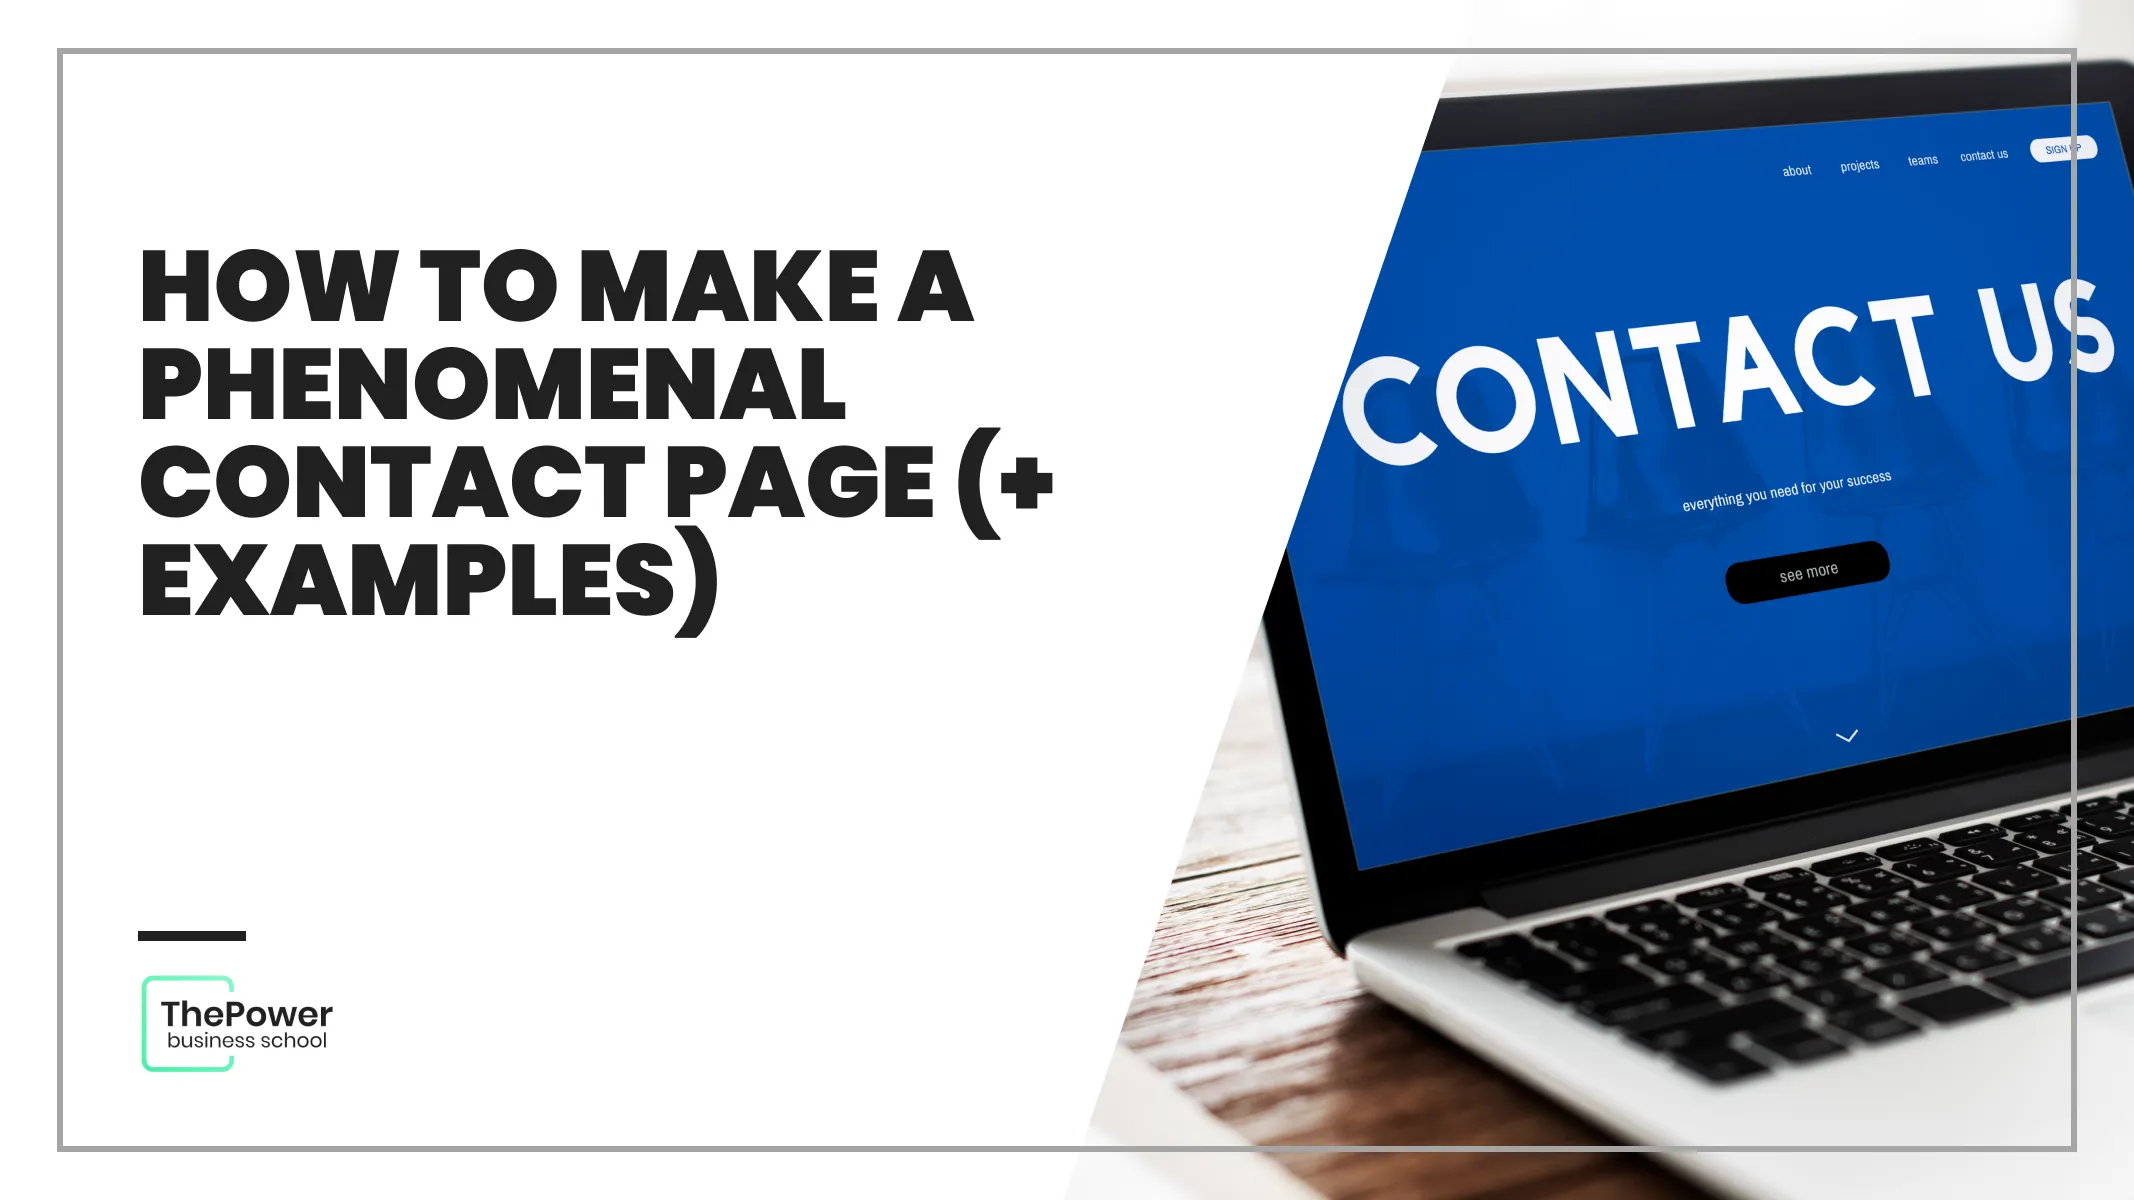 How to make a phenomenal contact page (+ examples)